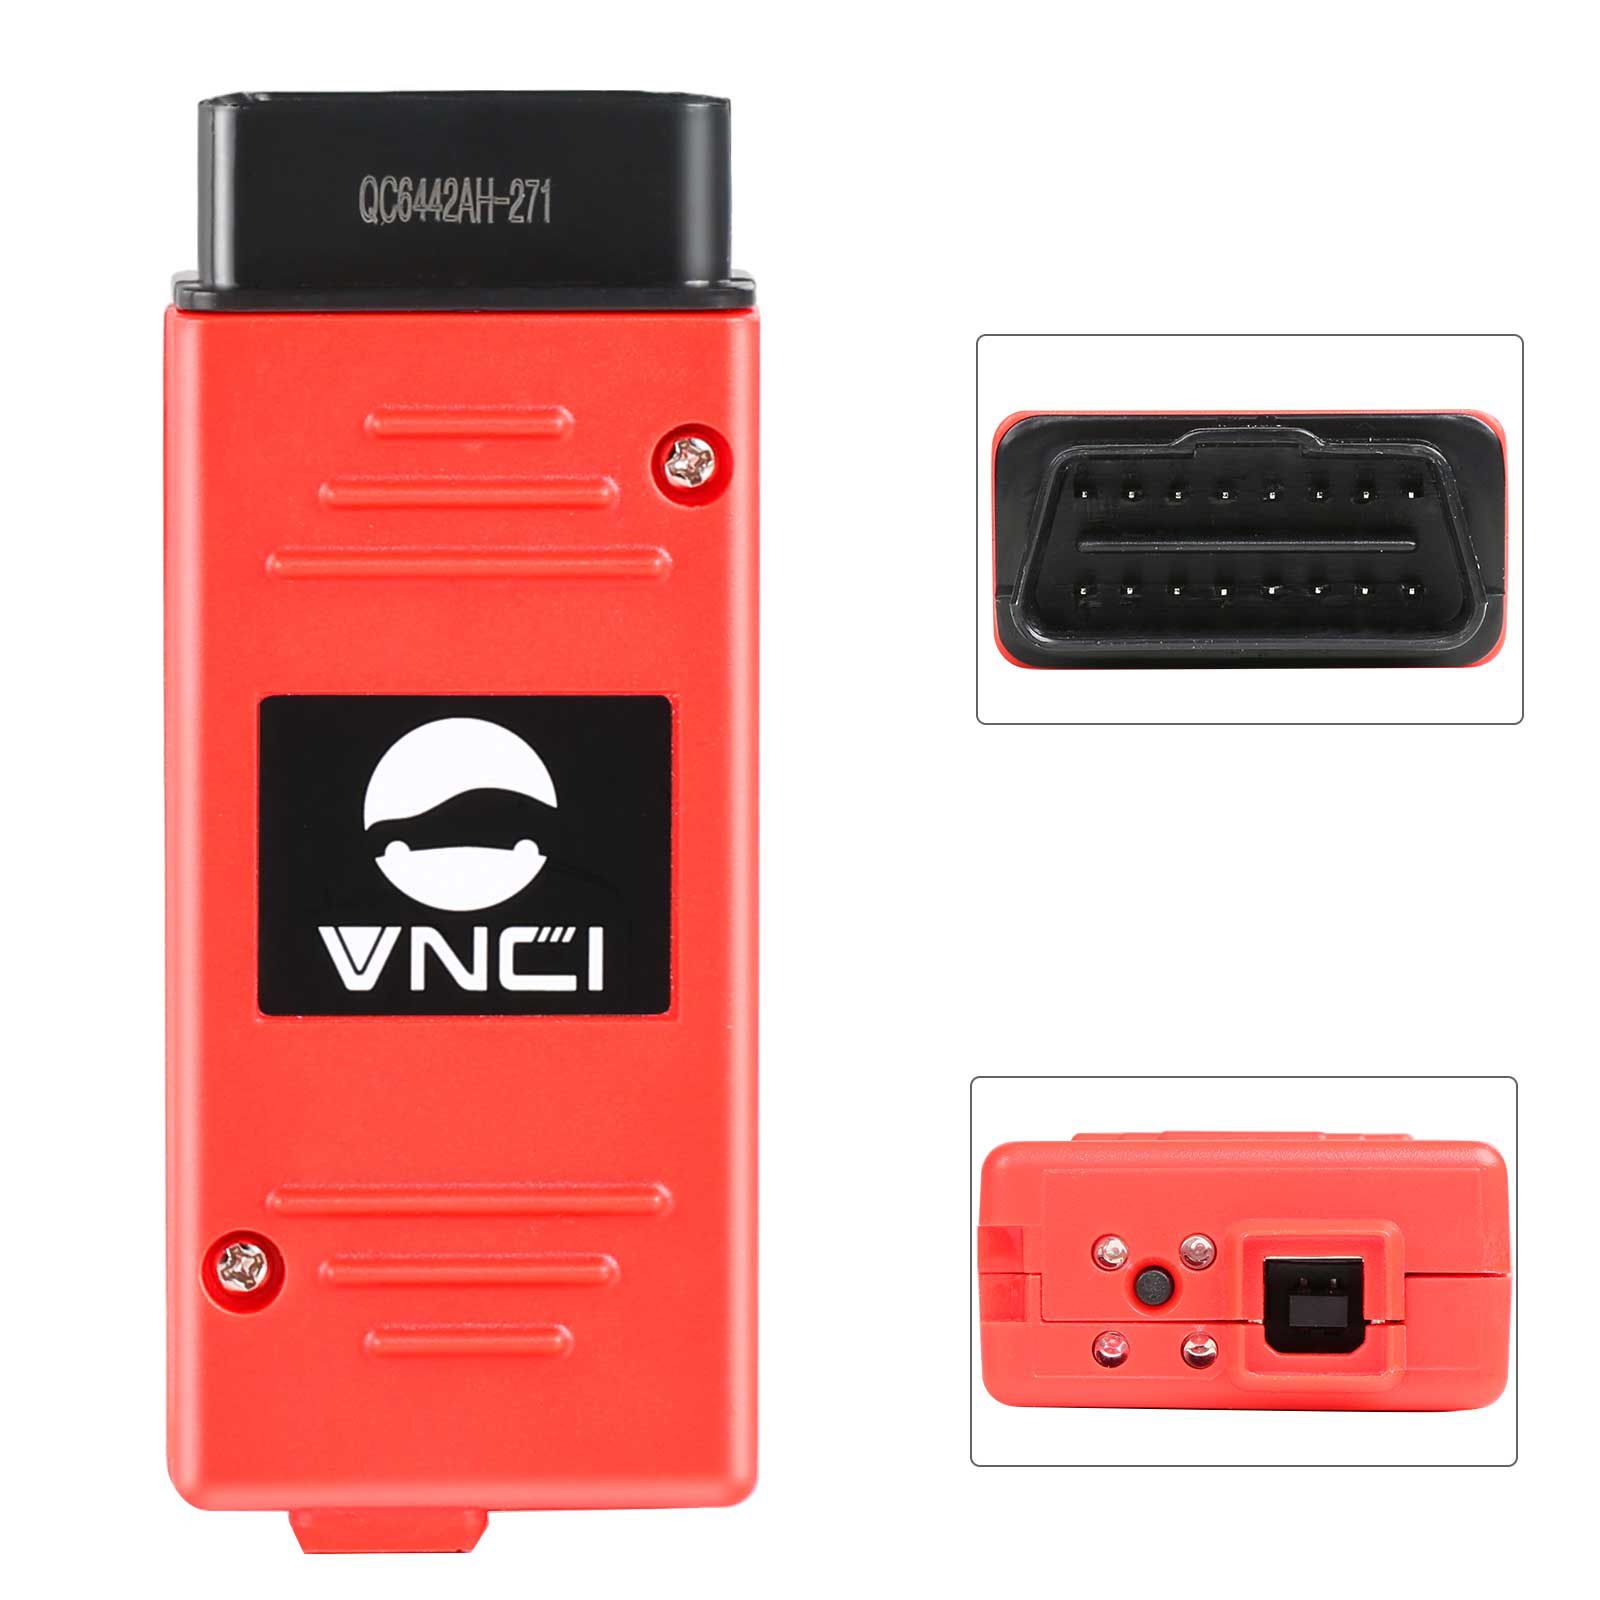 VNCI 6154A ODIS 11 Professional Diagnostic Tool for VW Audi Skoda Seat Supports CAN FD/ DoIP Updated Version of VAS6154A 2 Years Warranty